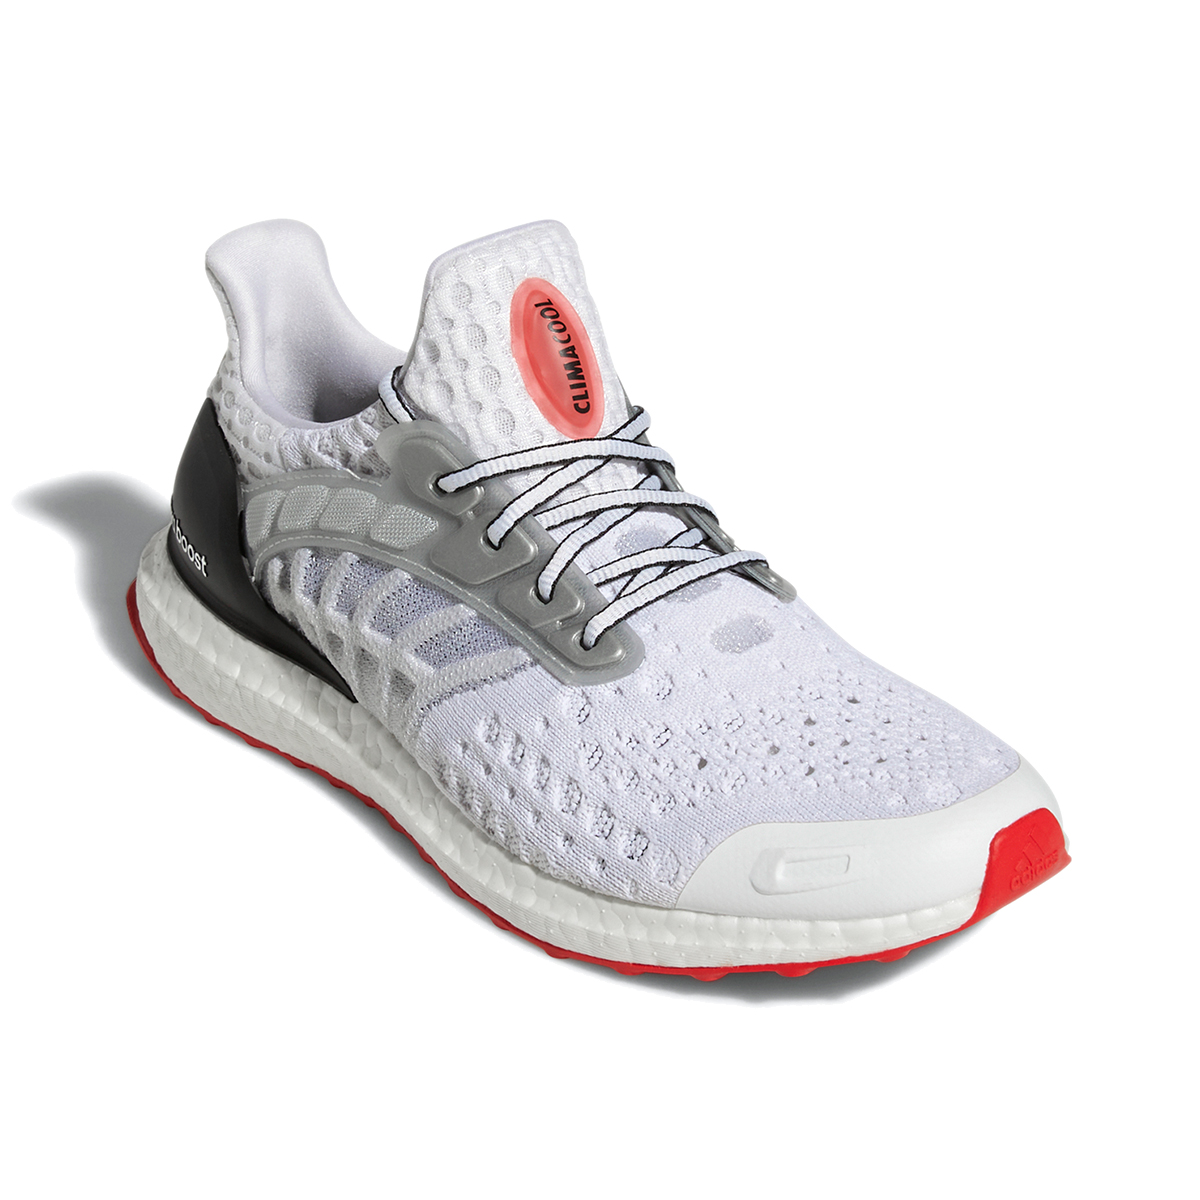 Ultraboost Climacool 2 DNA - White Red